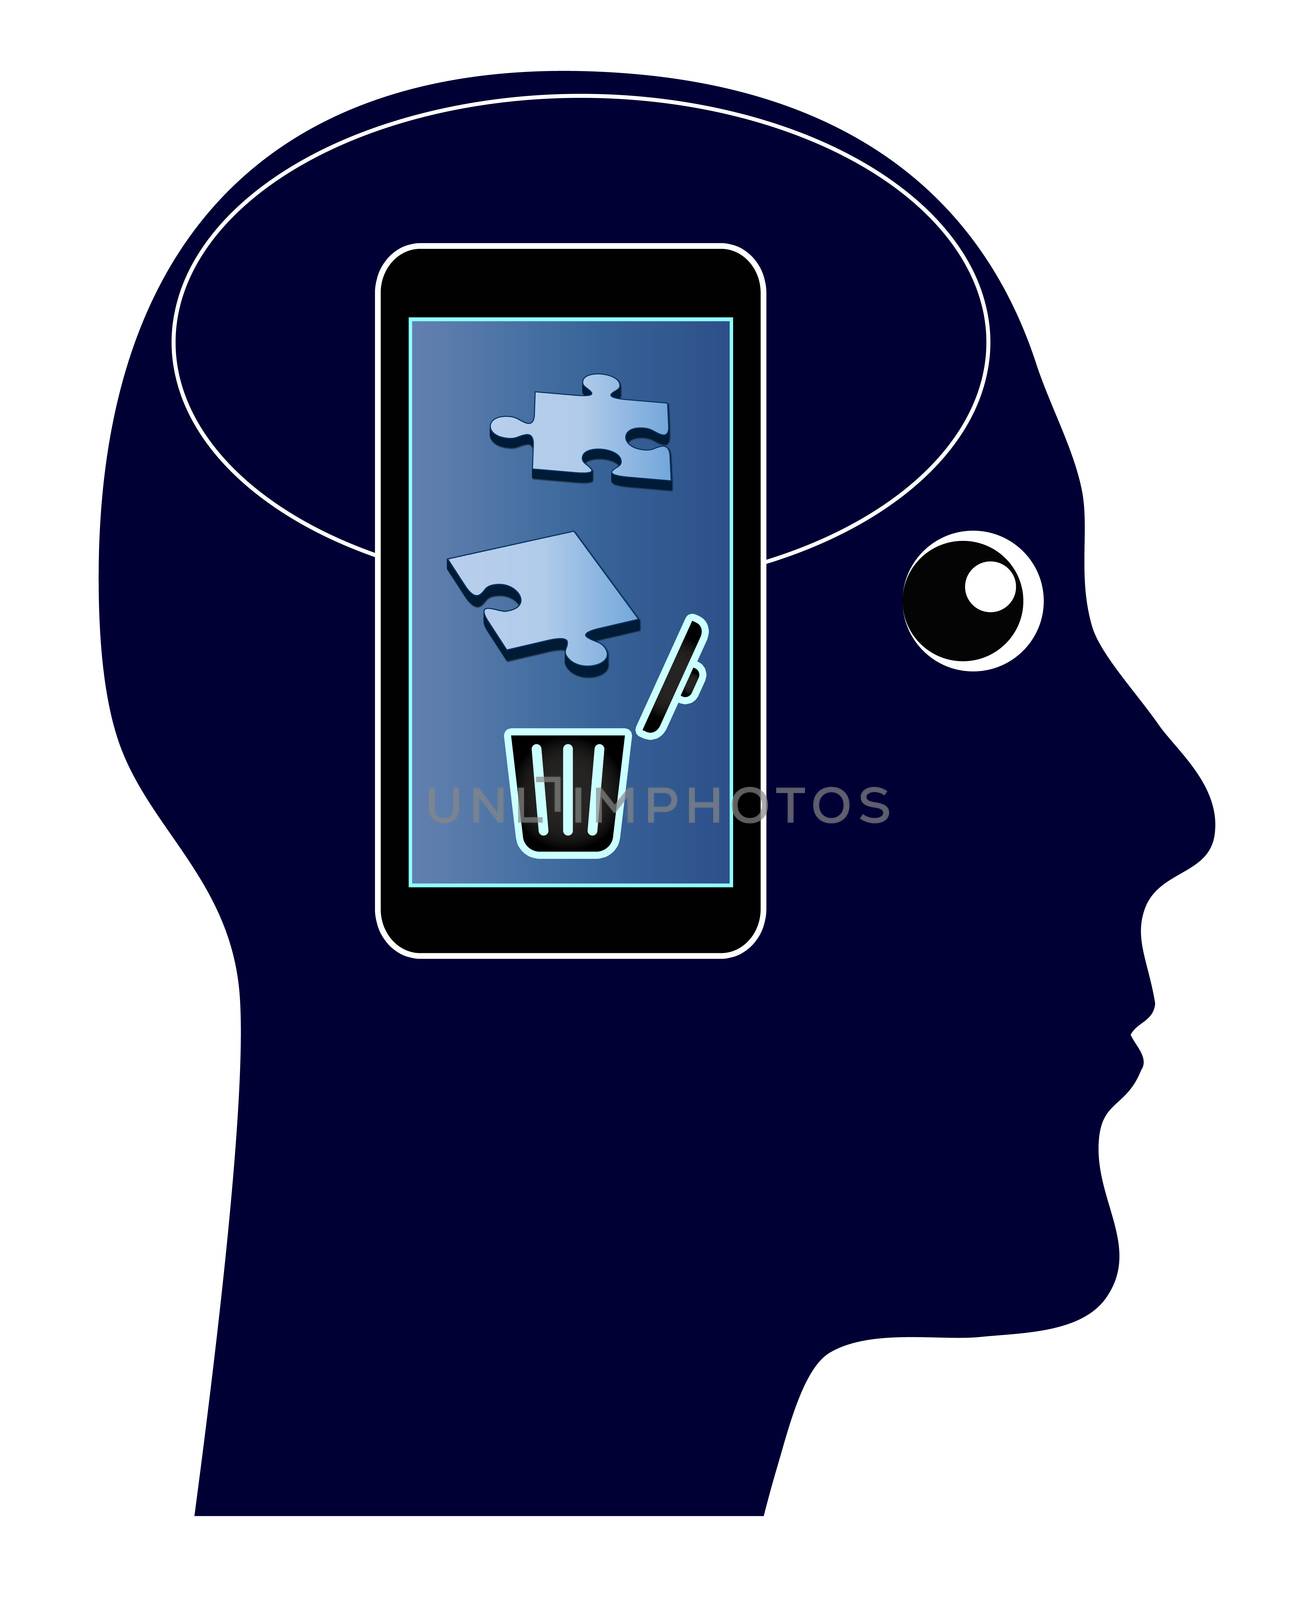 The overuse of mobile phones with damaging side effects of your brain